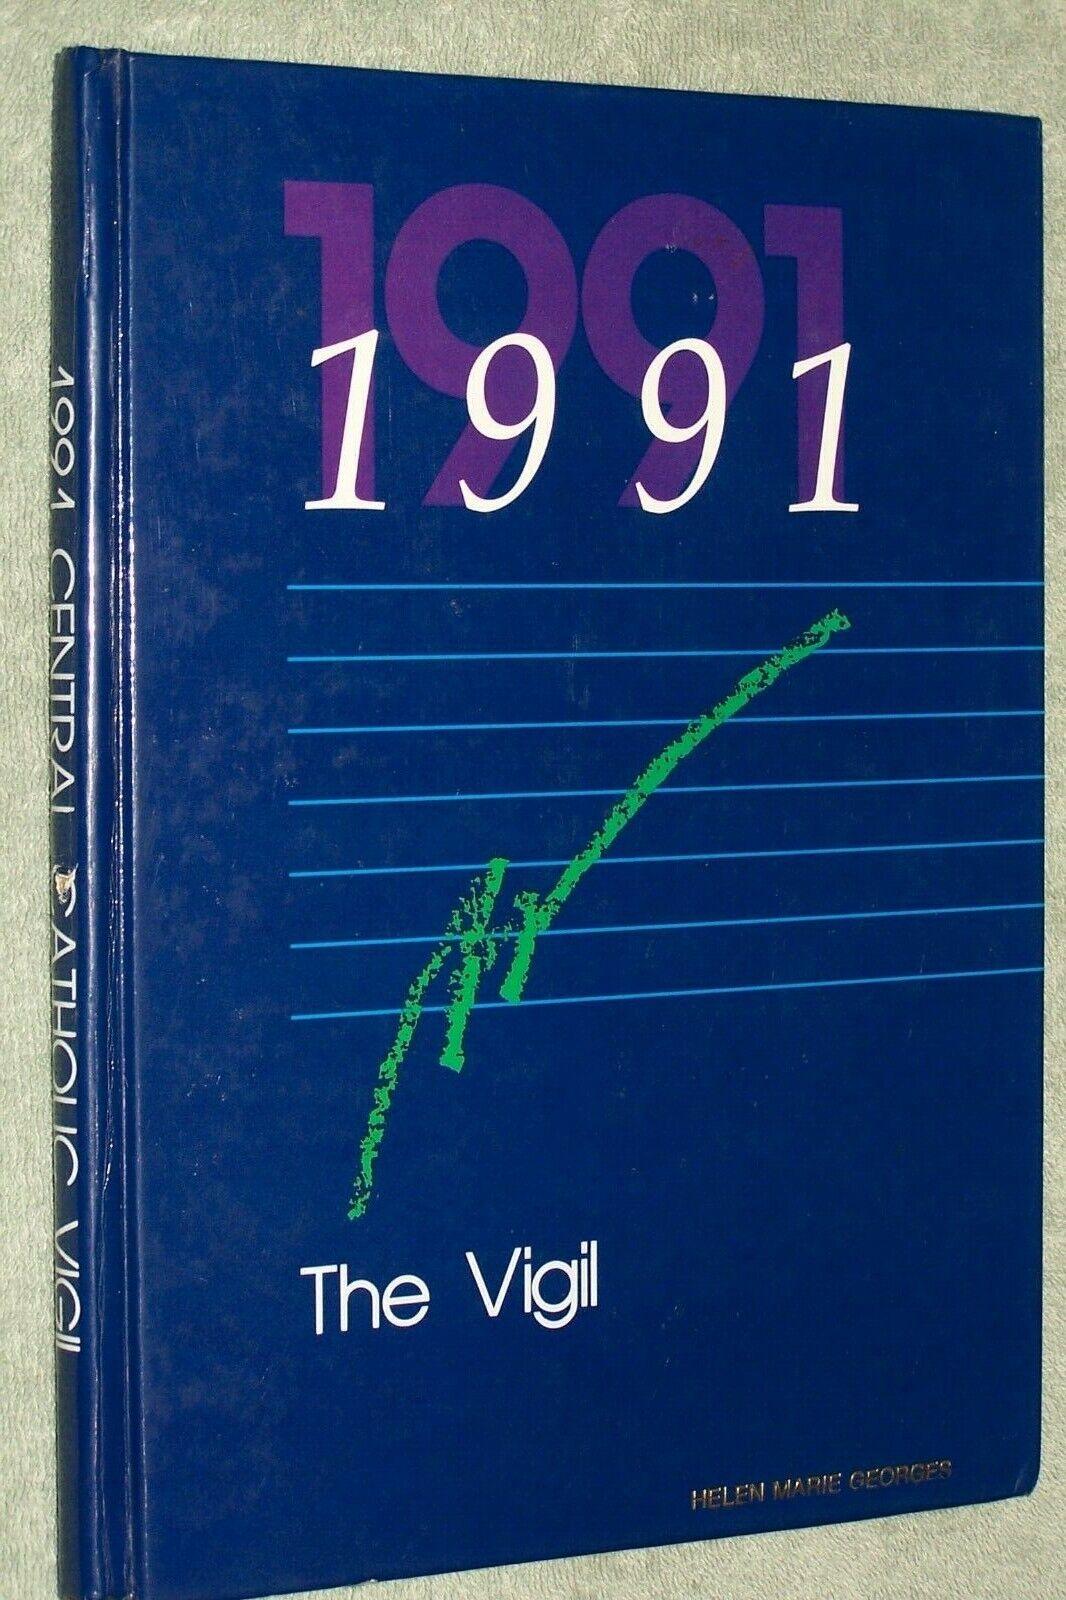 1991 Central Catholic High School Yearbook Annual Canton Ohio OH - The Vigil